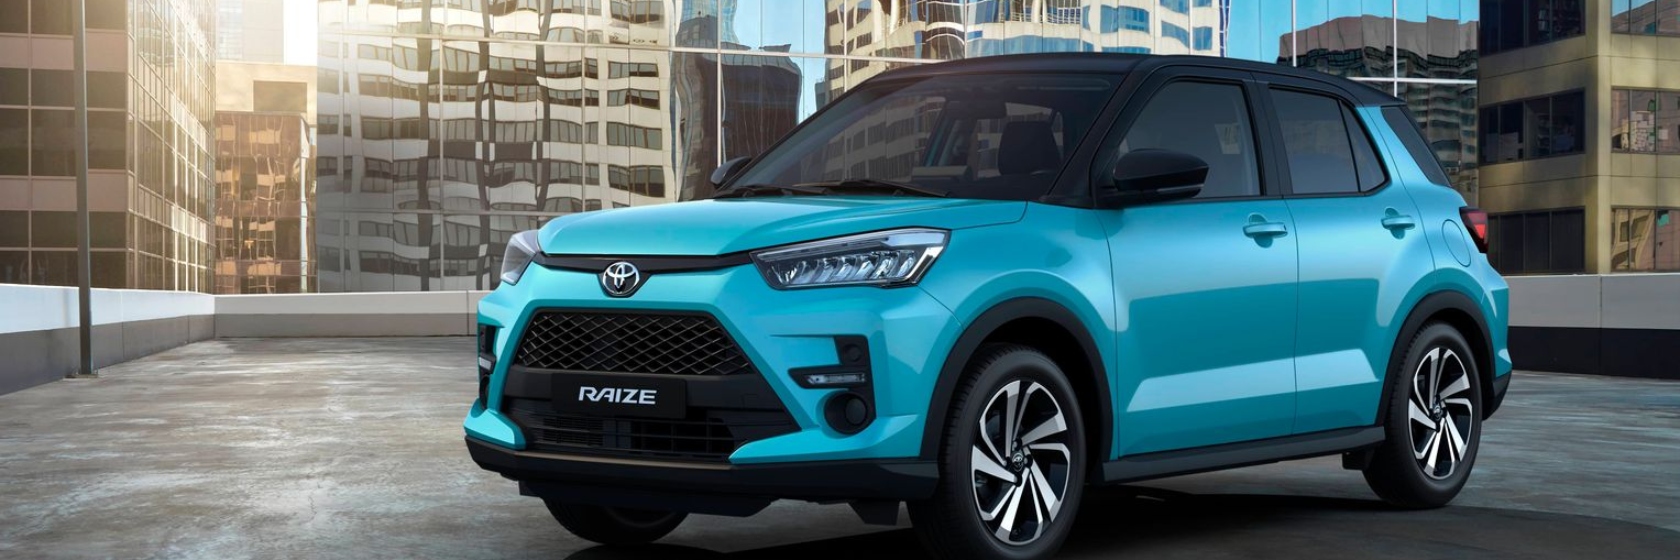 closer-look-at-the-new-compact-suv-toyota-raize-2022